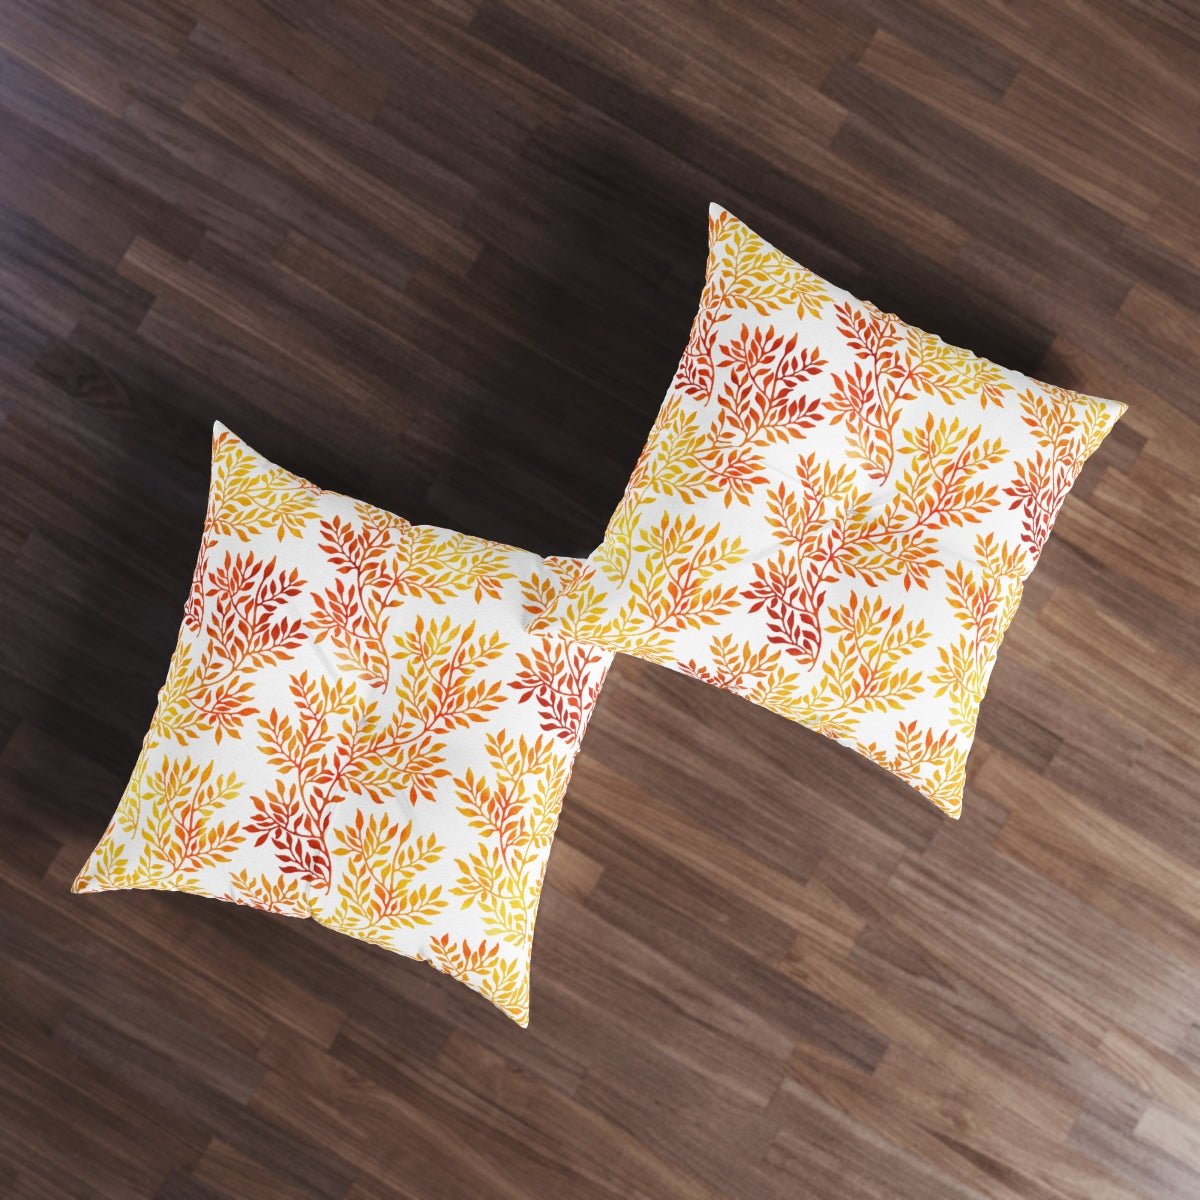 Fall Red and Orange Leaves Tufted Square Floor Pillow - Puffin Lime